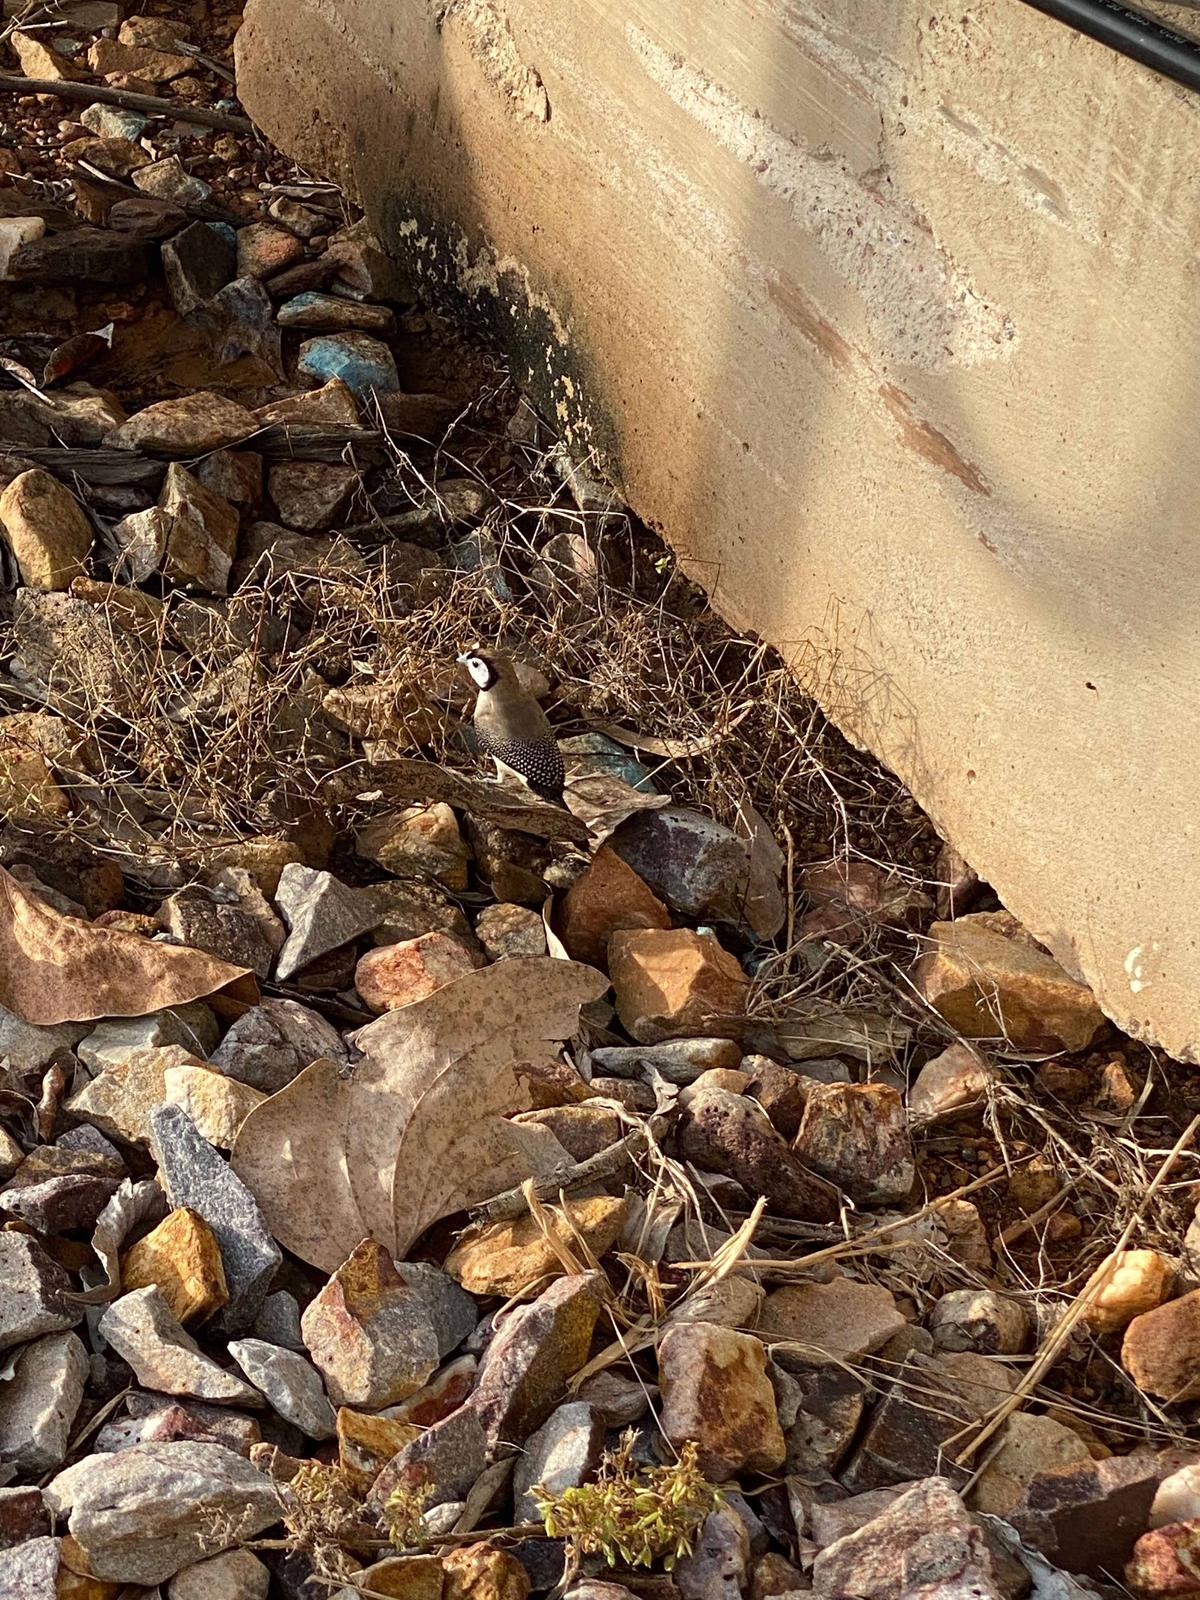 A finch hiding amid a bed of rocks. (Courtesy of Caters News)